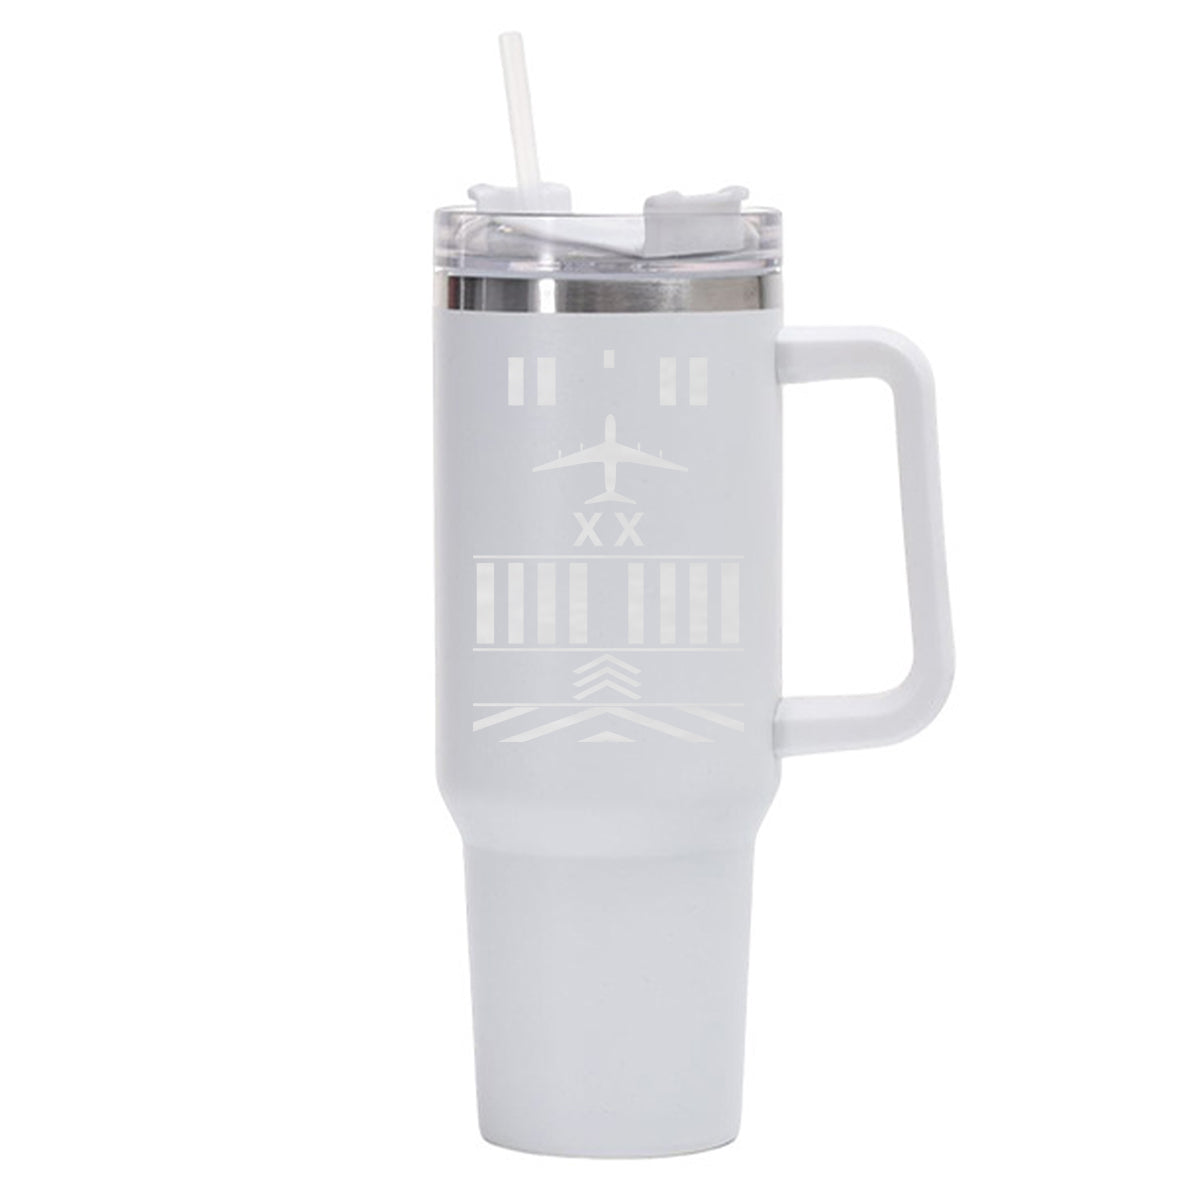 Products Runway (Customizable) Designed 40oz Stainless Steel Car Mug With Holder